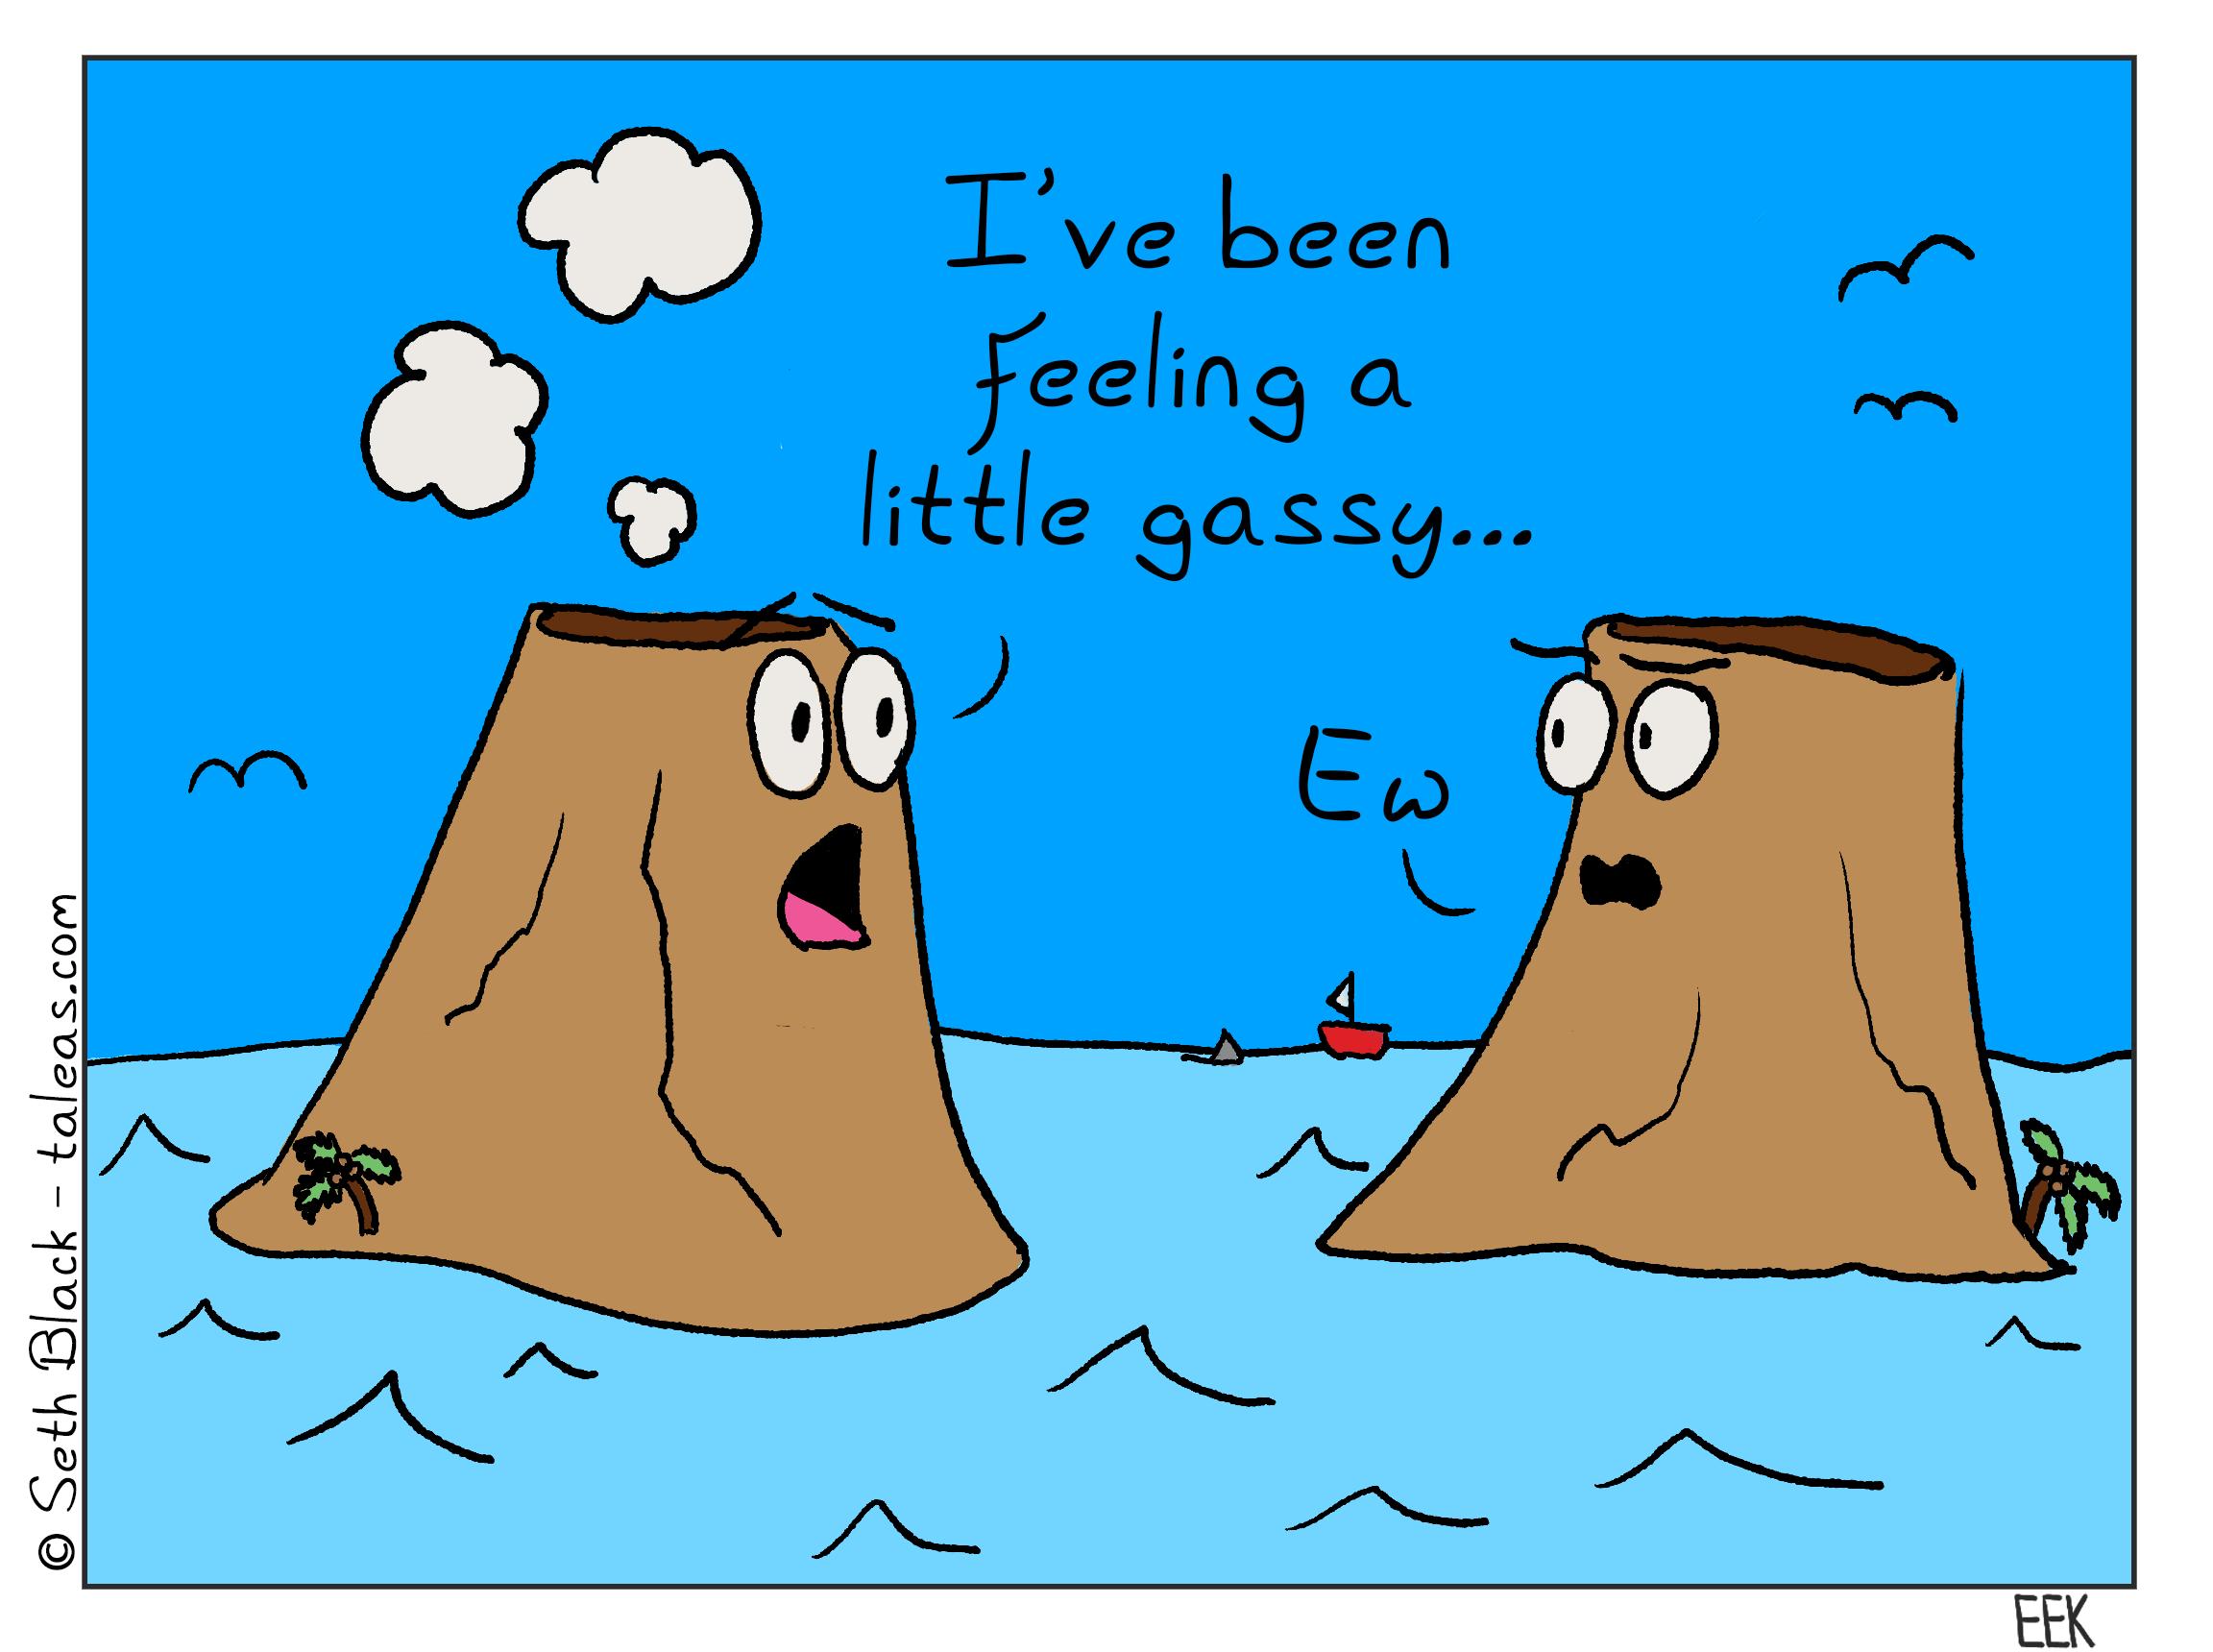 Two volcanoes are situated next to each other in the ocean. One has puffs of gas emitting from the caldera, and states, Ive been feeling a lil gassy lately.